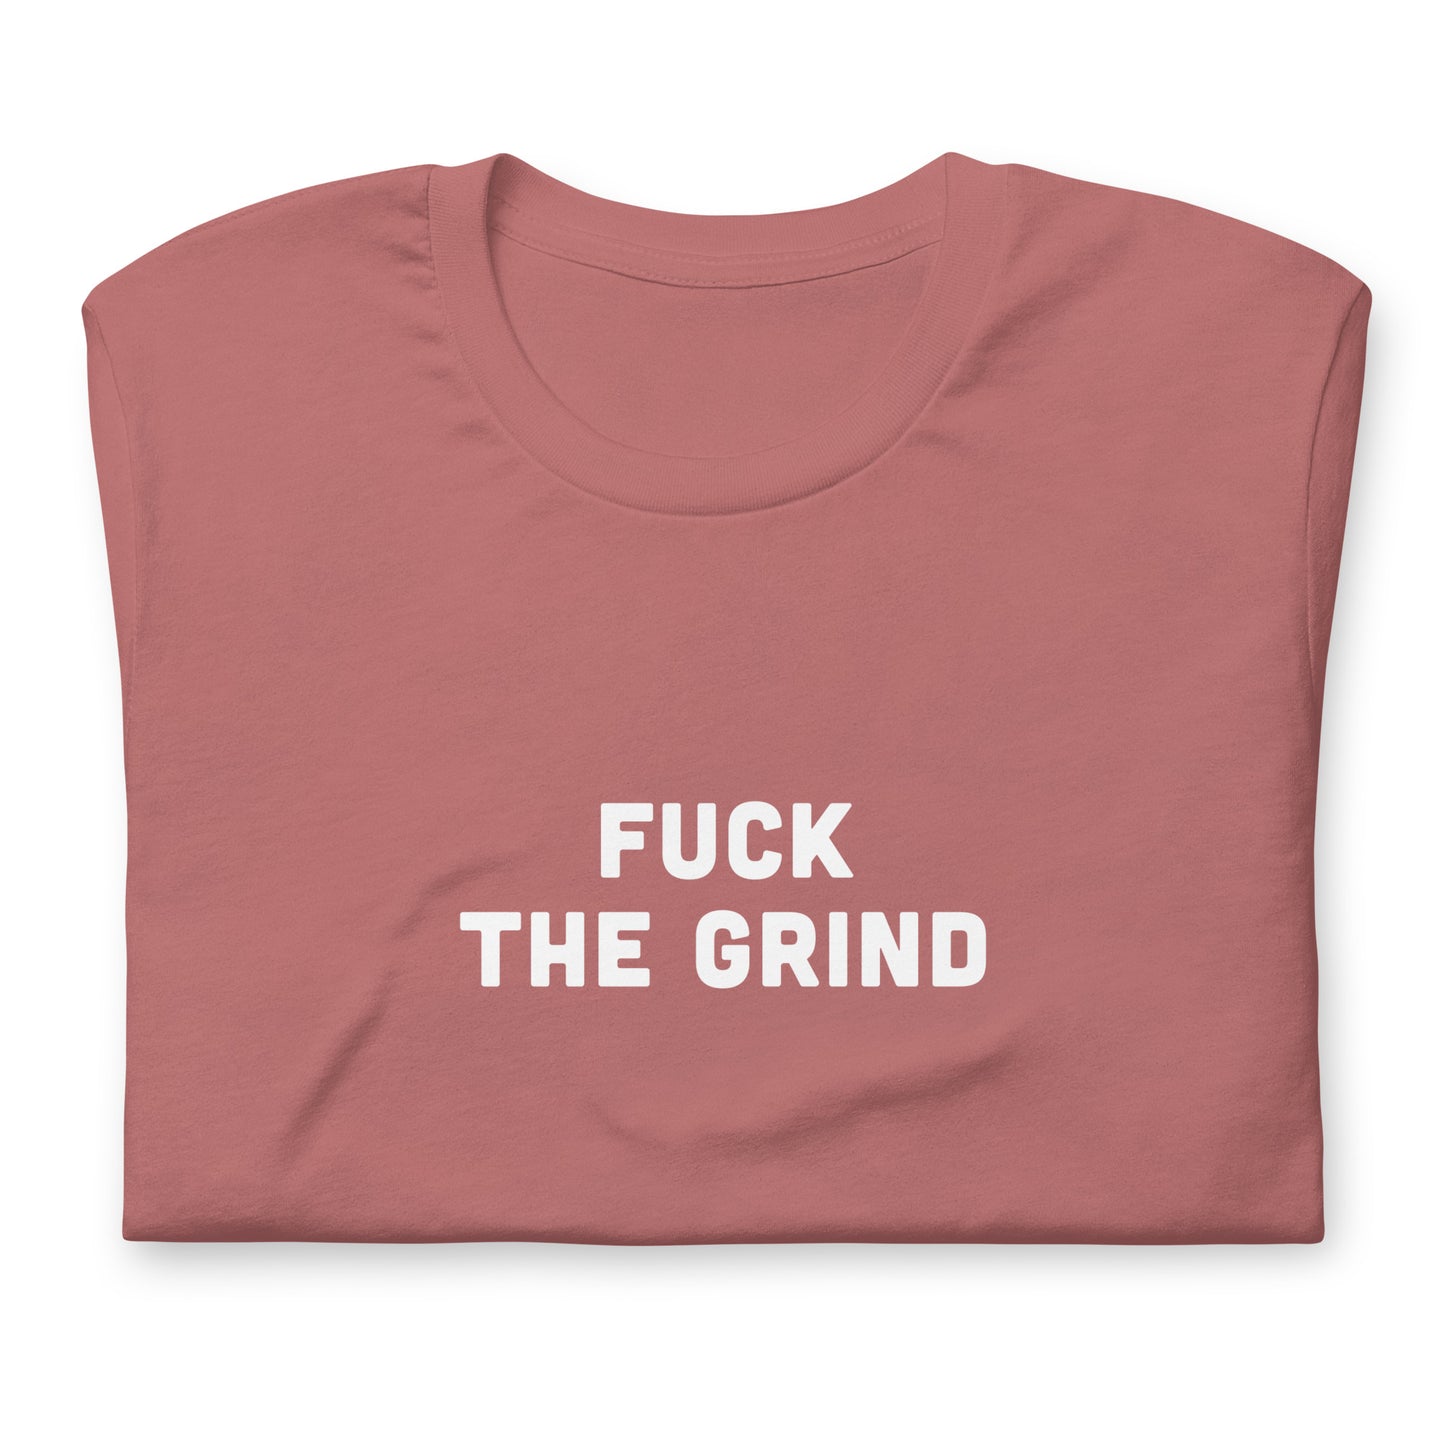 Fuck The Grind T-Shirt Size 2XL Color Navy